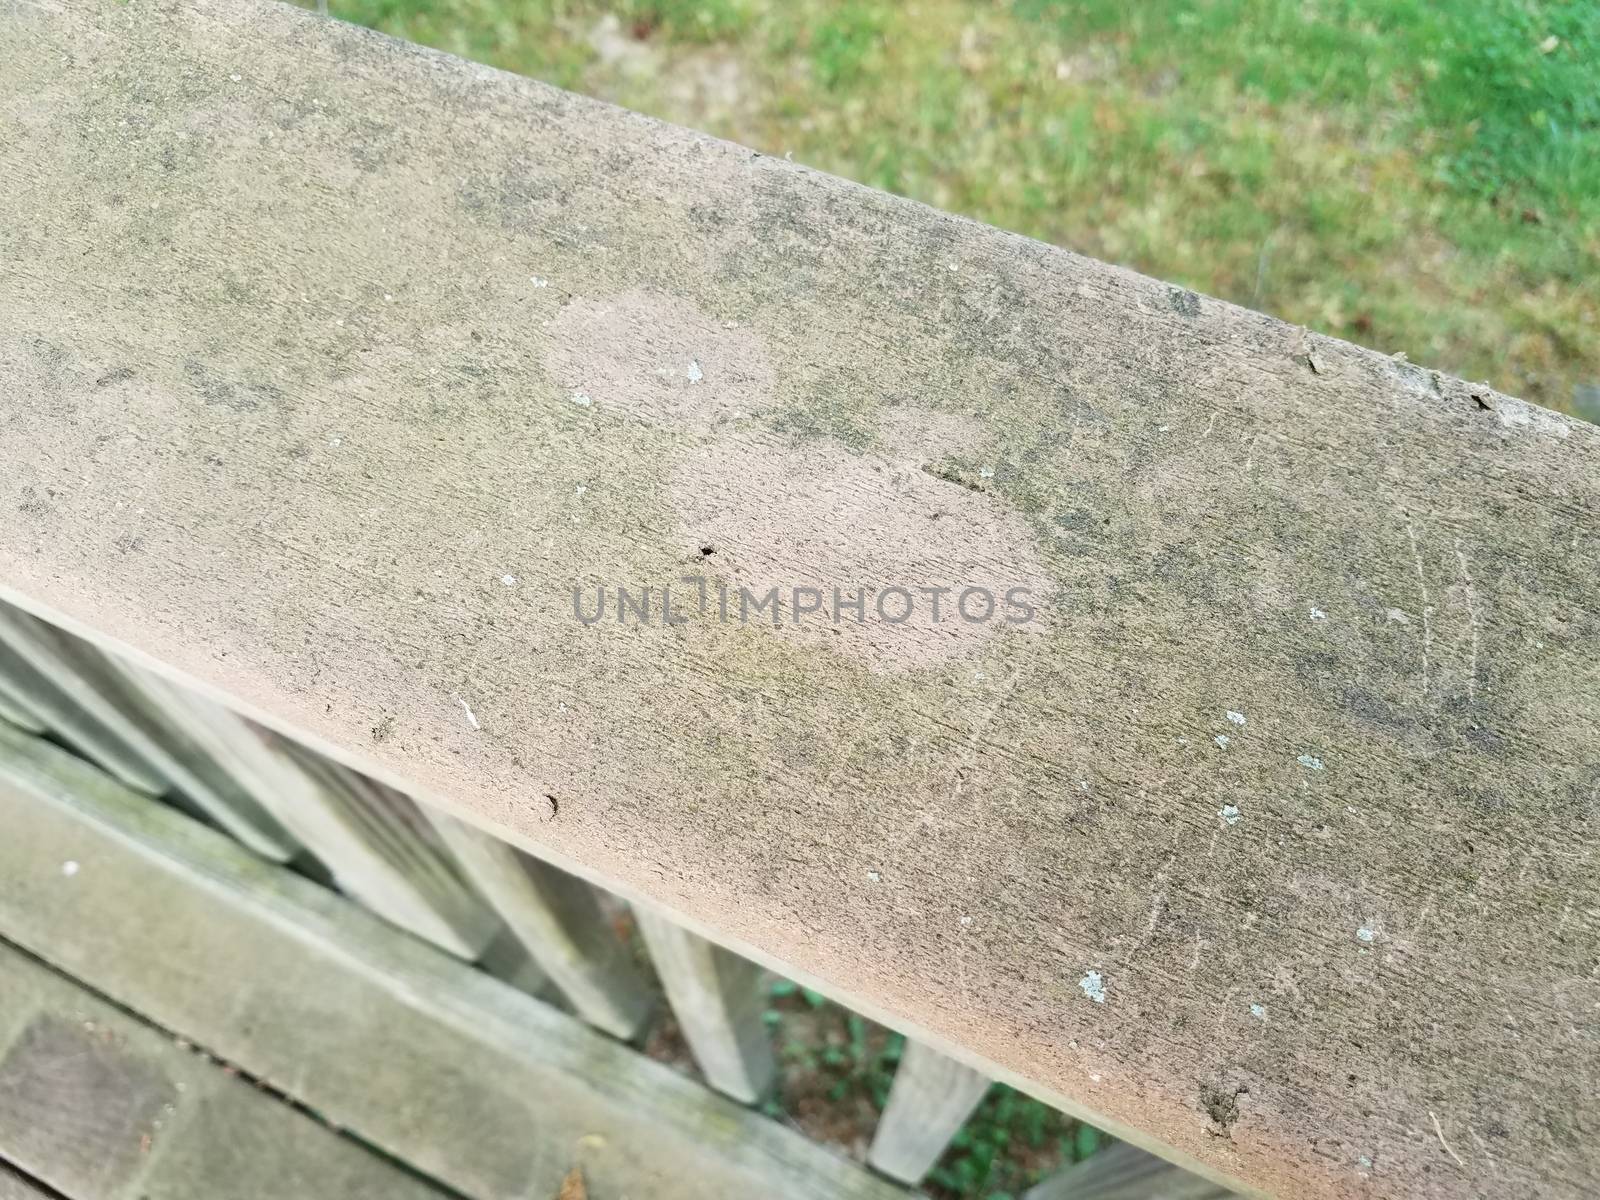 weathered or worn discolored wood deck with green algae by stockphotofan1